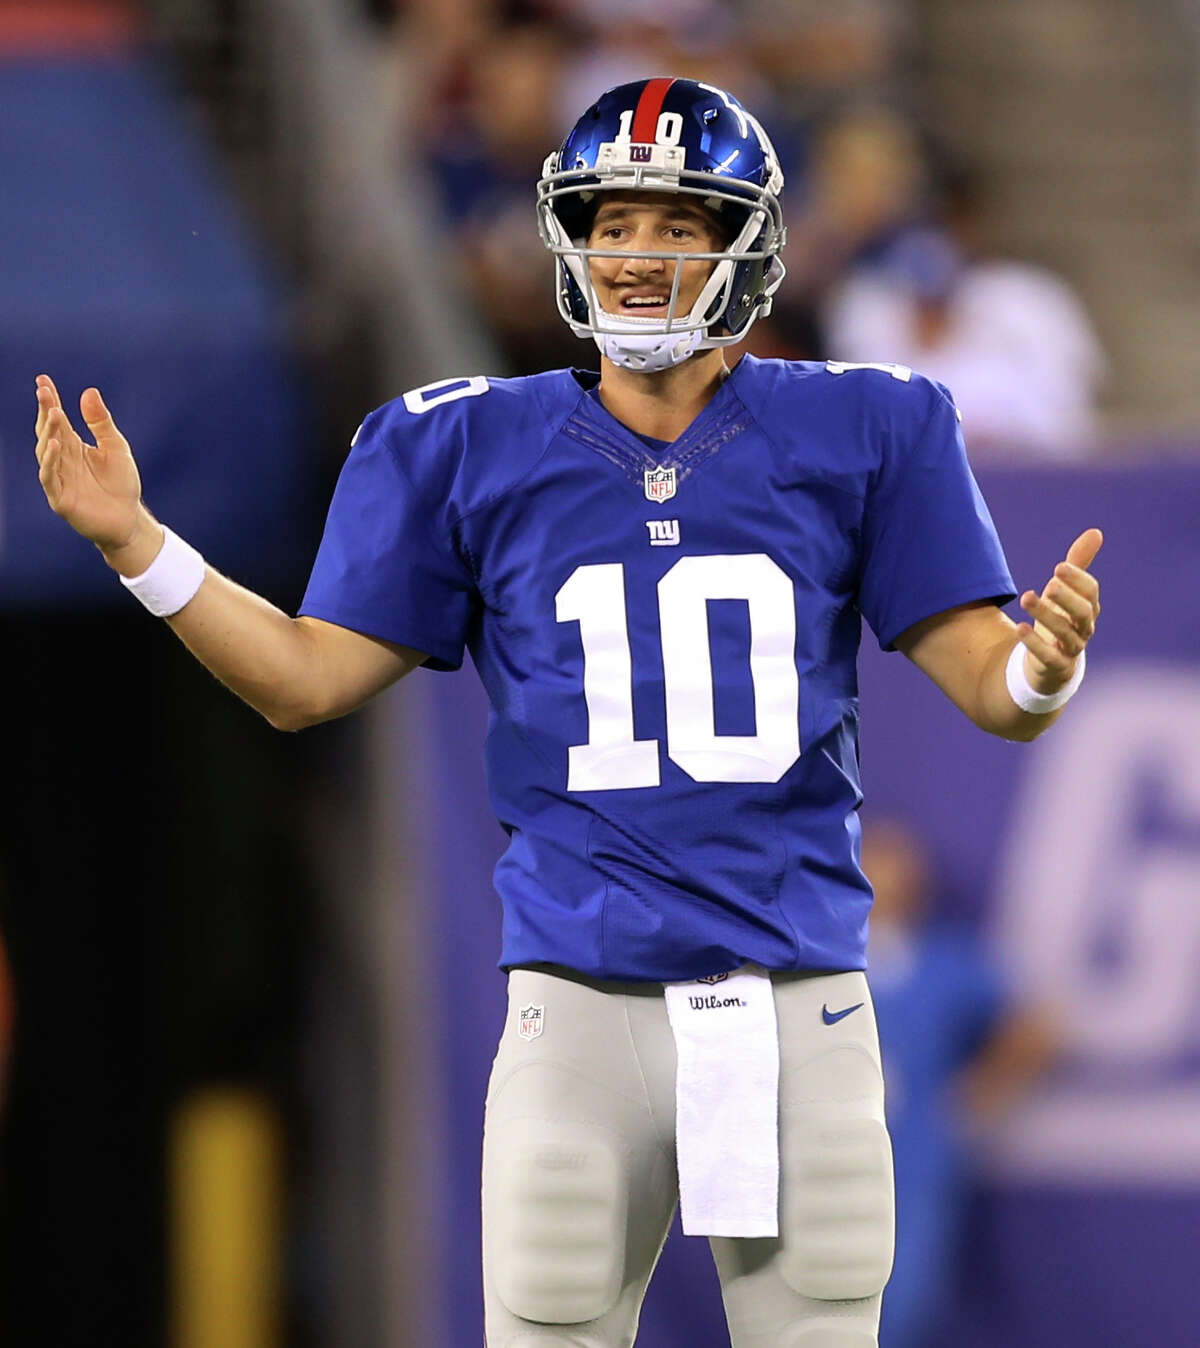 Eli Manning will need to play better than he did in the preseason if the Giants are to end their two-year playoff drought.